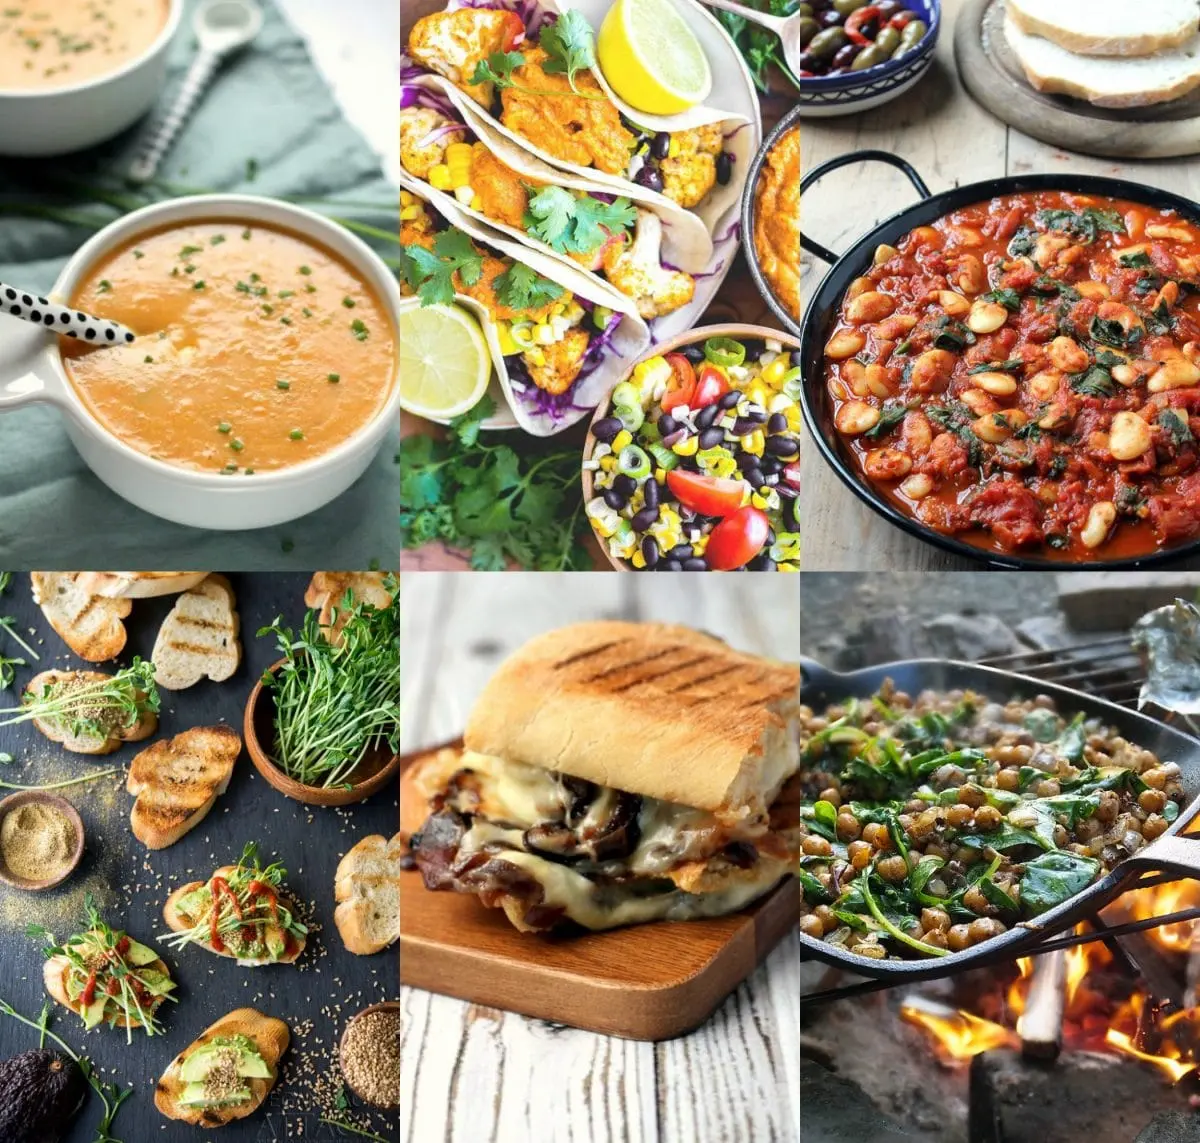 vegetarian smoked recipes - What foods are best cooked in a smoker